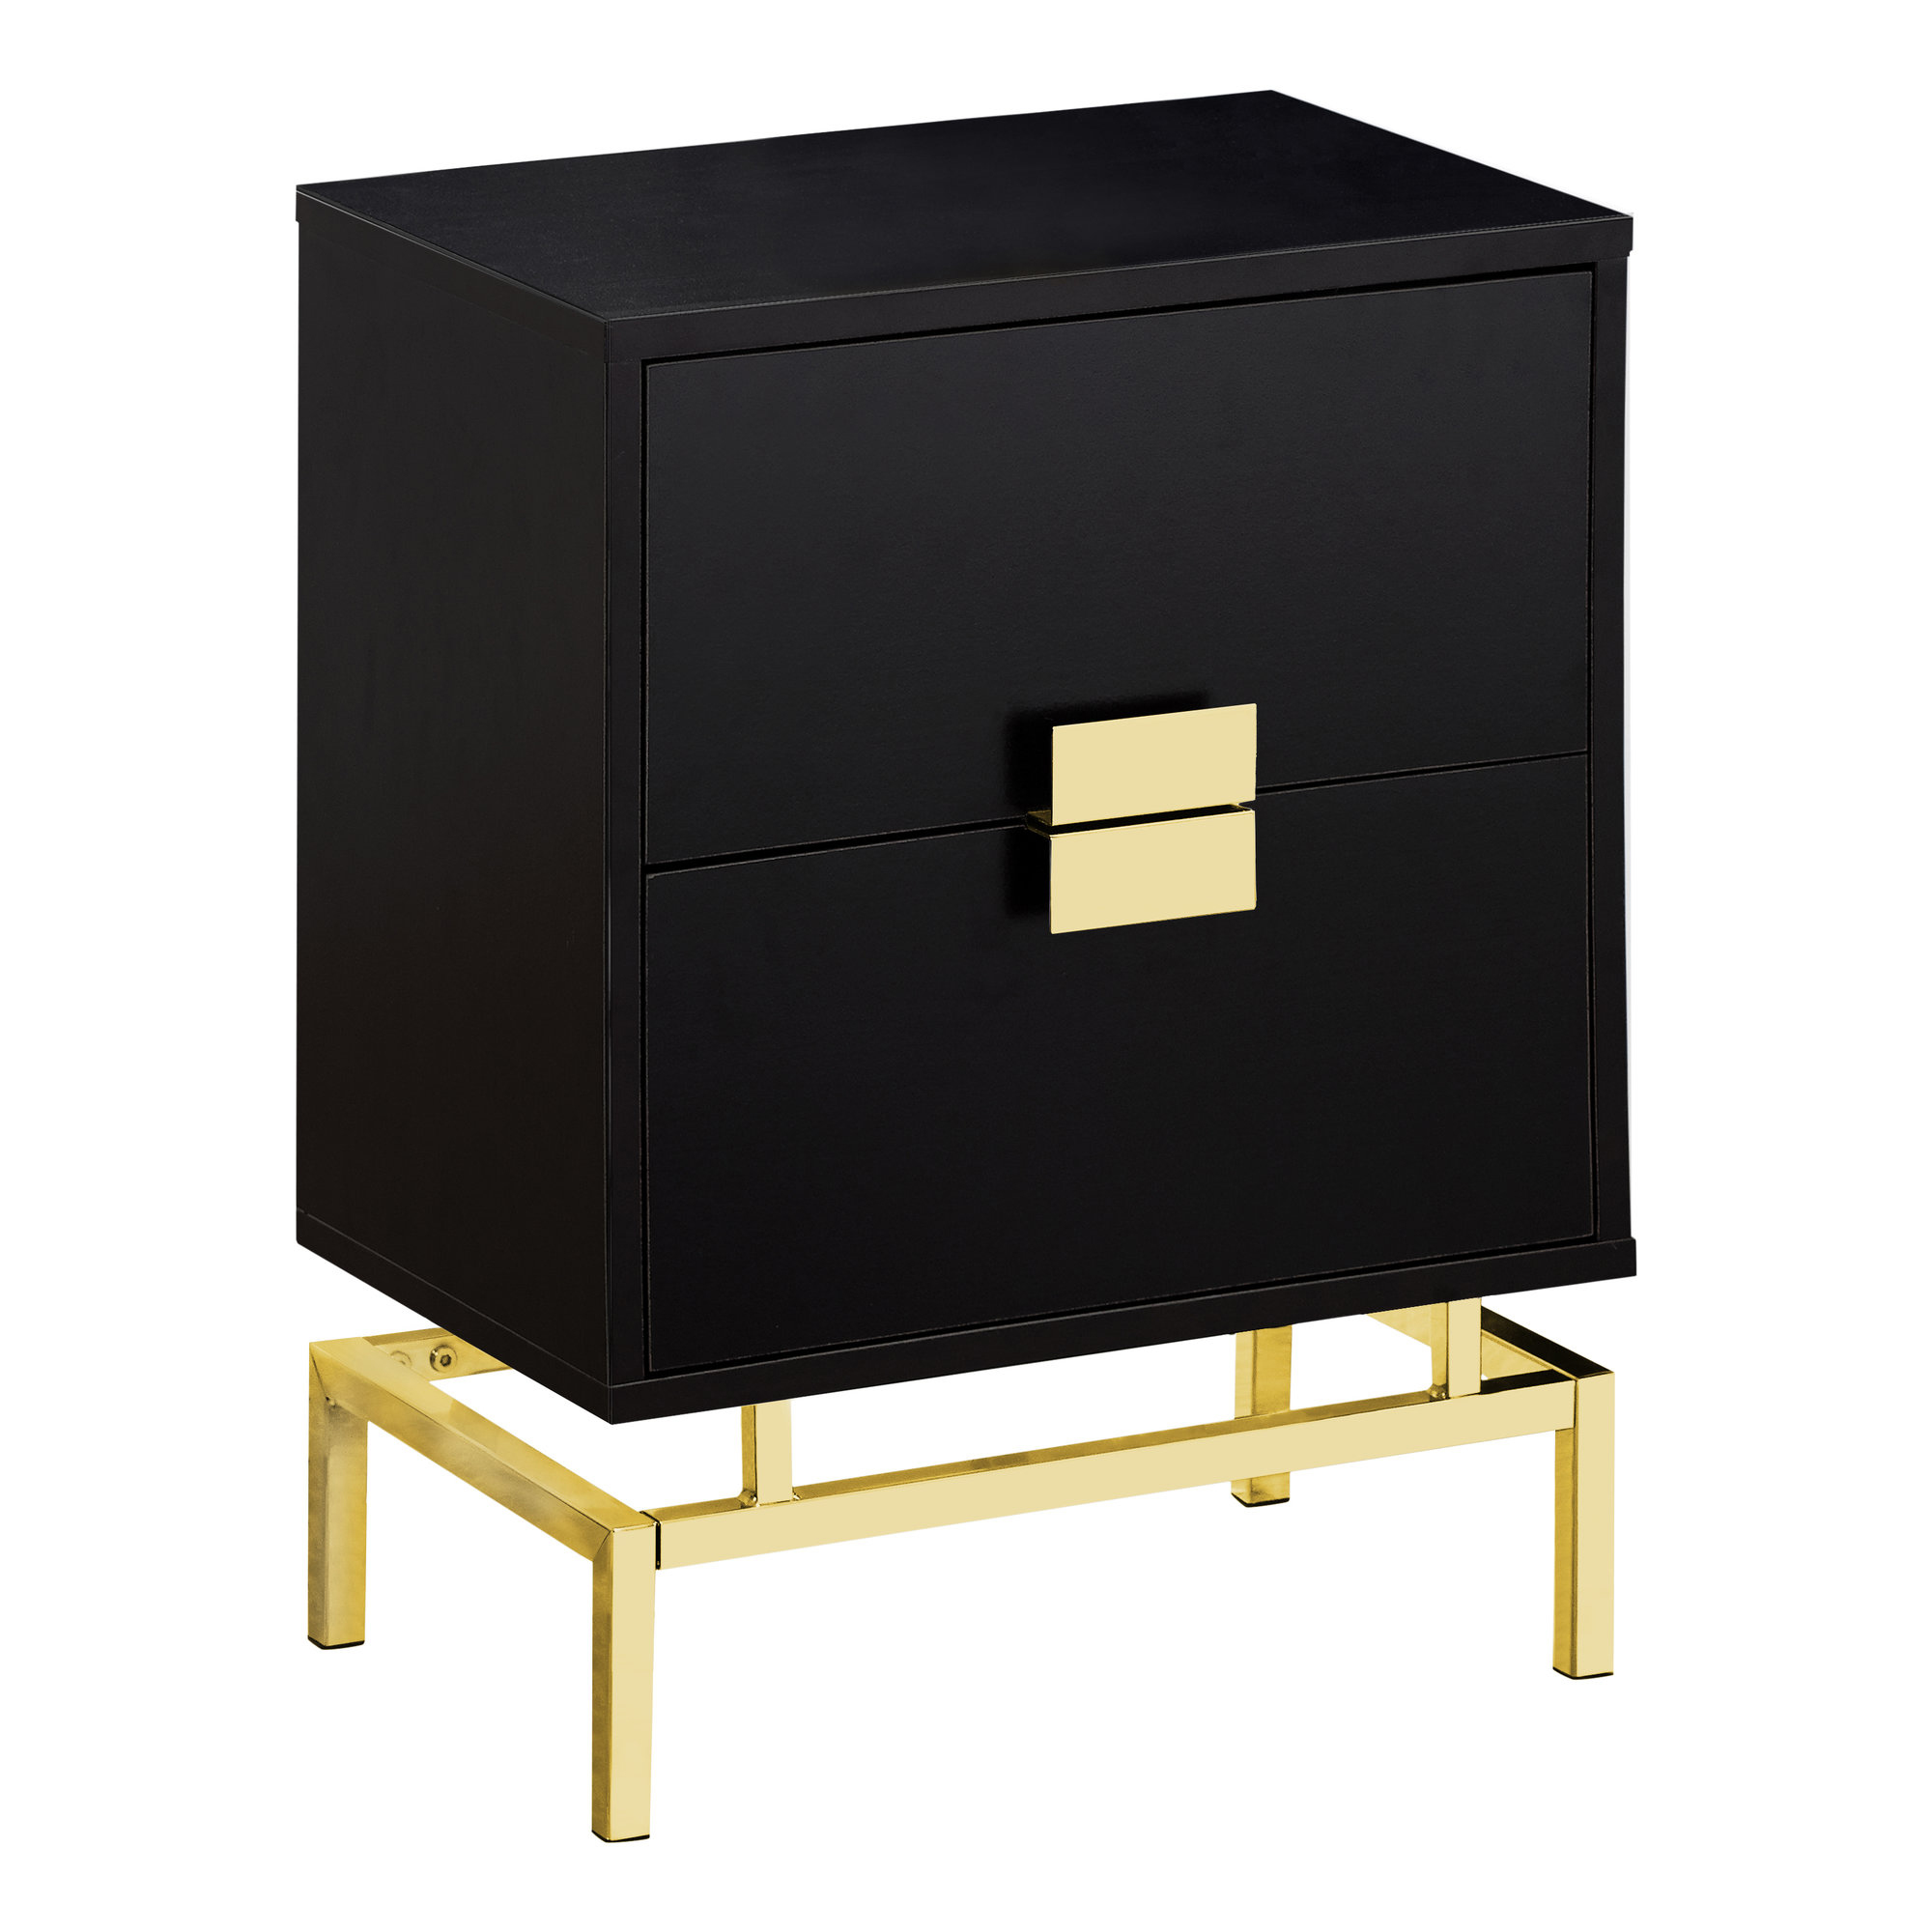 ACCENT SIDE TABLE - 24"H / CAPPUCCINO / GOLD METAL